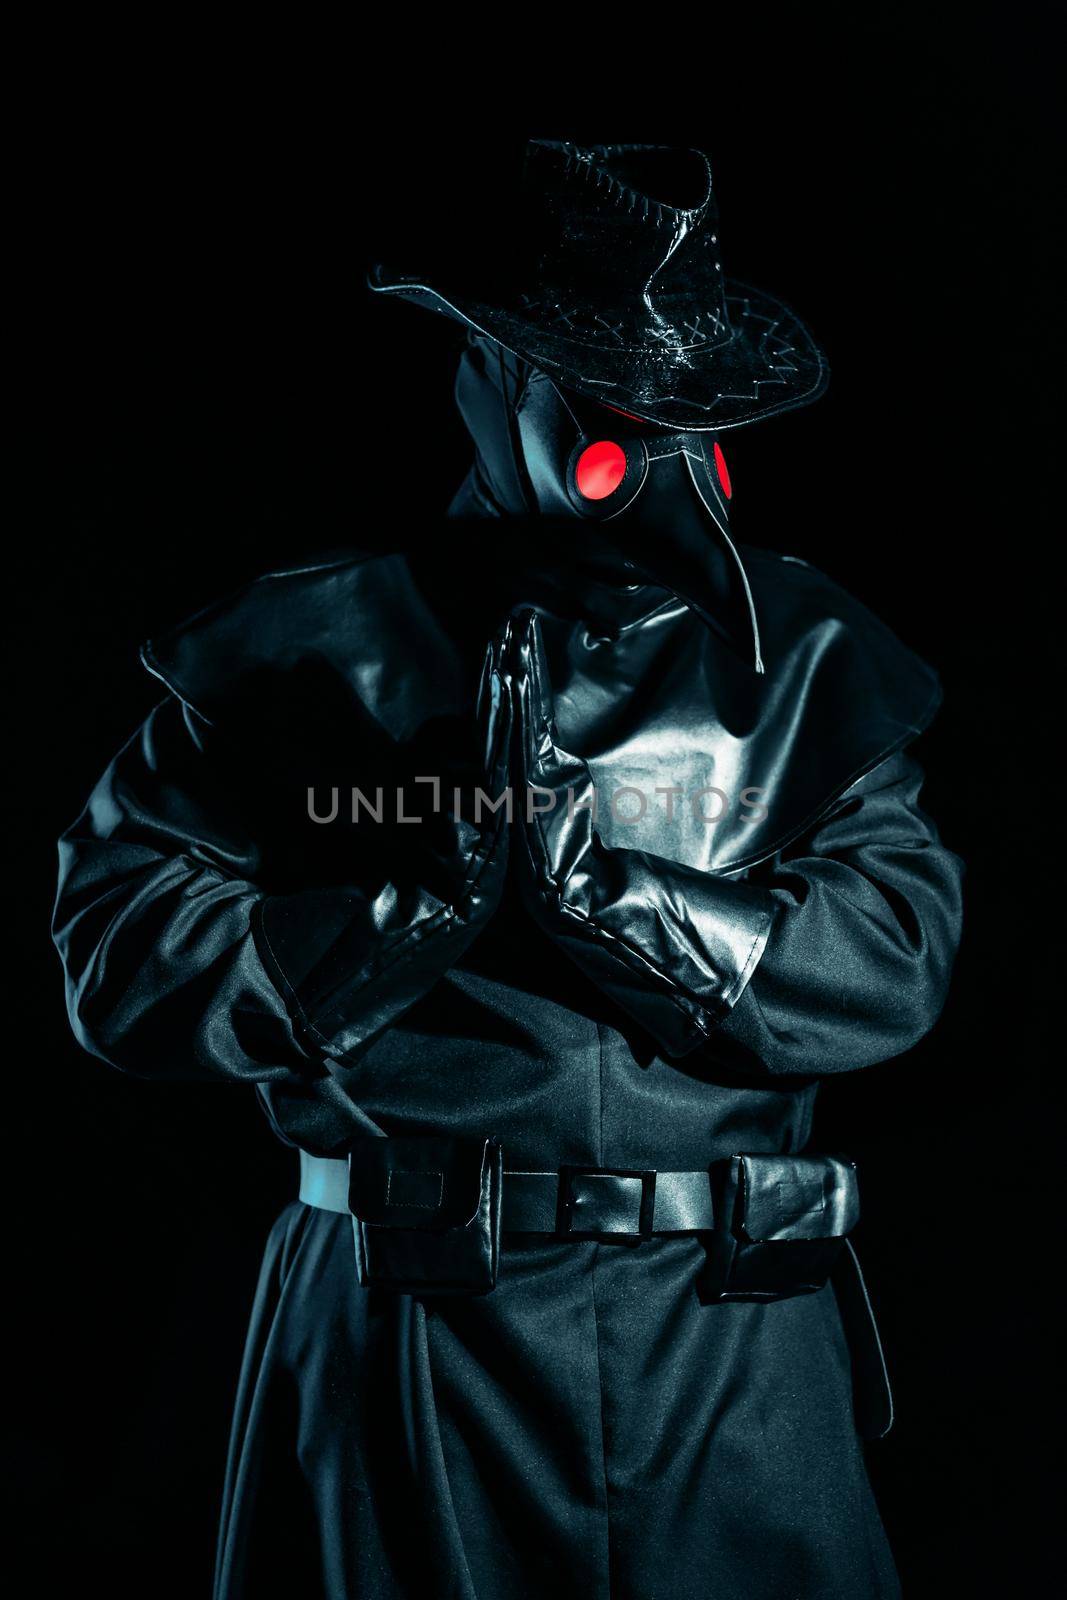 Man in plague doctor costume with crow-like mask praying with hands isolated on black background. Creepy mask, historical costume concept. Epidemic.